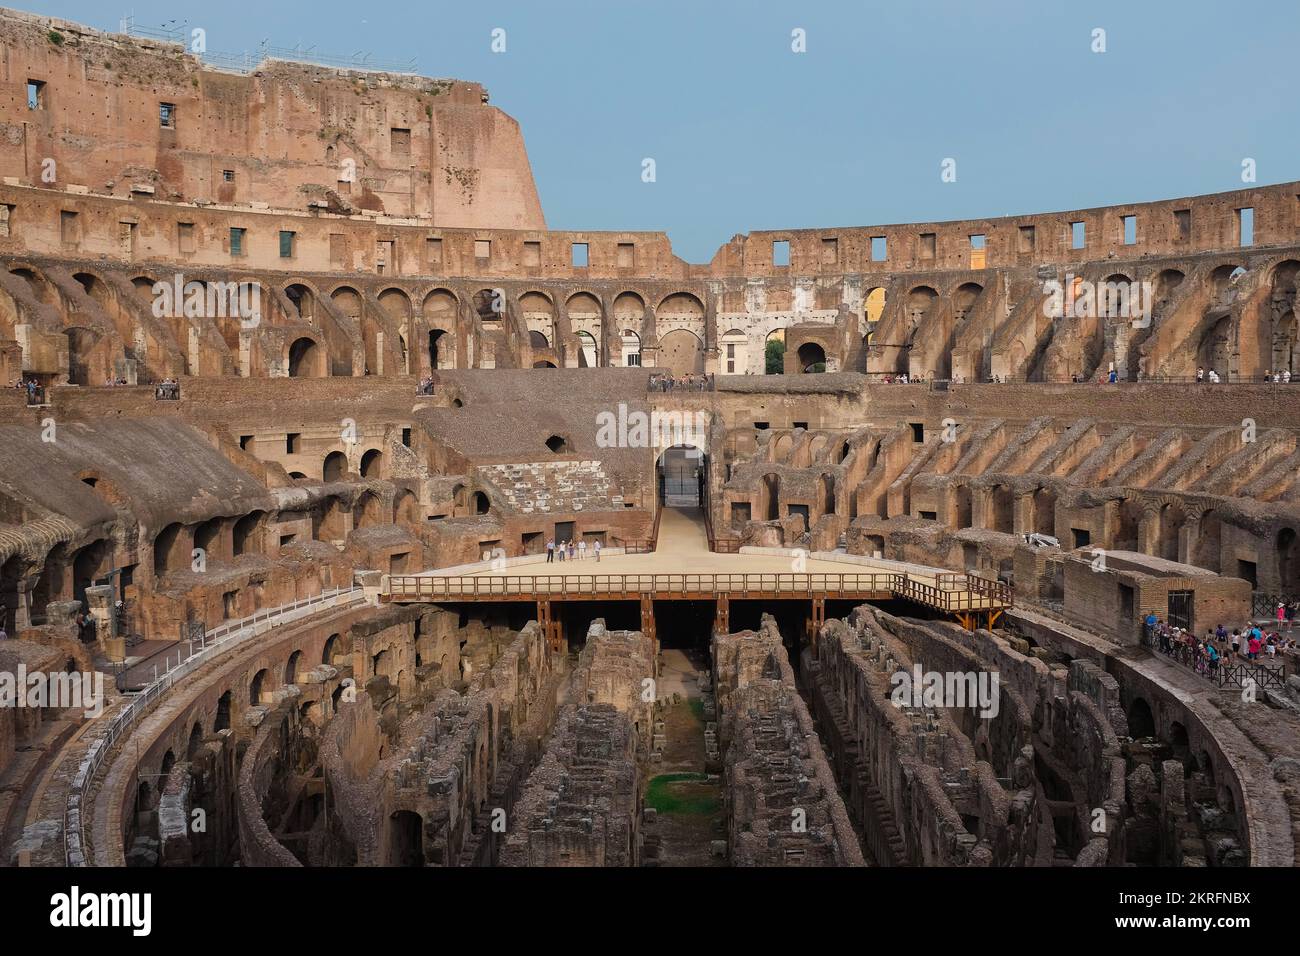 Rome, Italy - Interior of Roman Colosseum, an ancient oval amphitheatre. Inside largest arena for gladiators. Famous landmark. Tourist attraction. Stock Photo